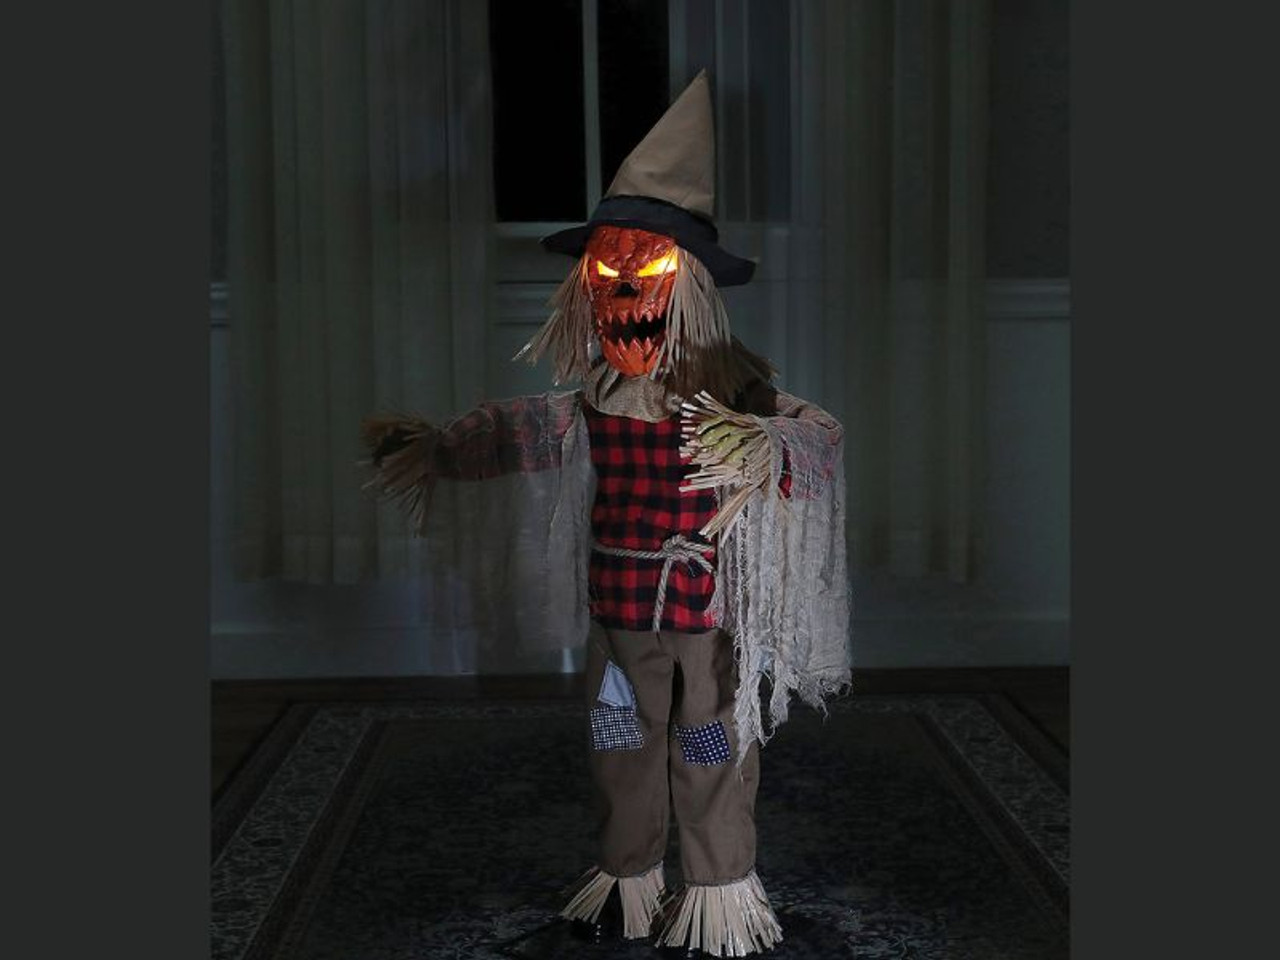 36" Twitching Scarecrow Animated Prop: Arms Wave back and forth, Head w/ yellow Light-up eyes turns, Orange Pumpkin Face w/ jagged mouth moves & speaks.